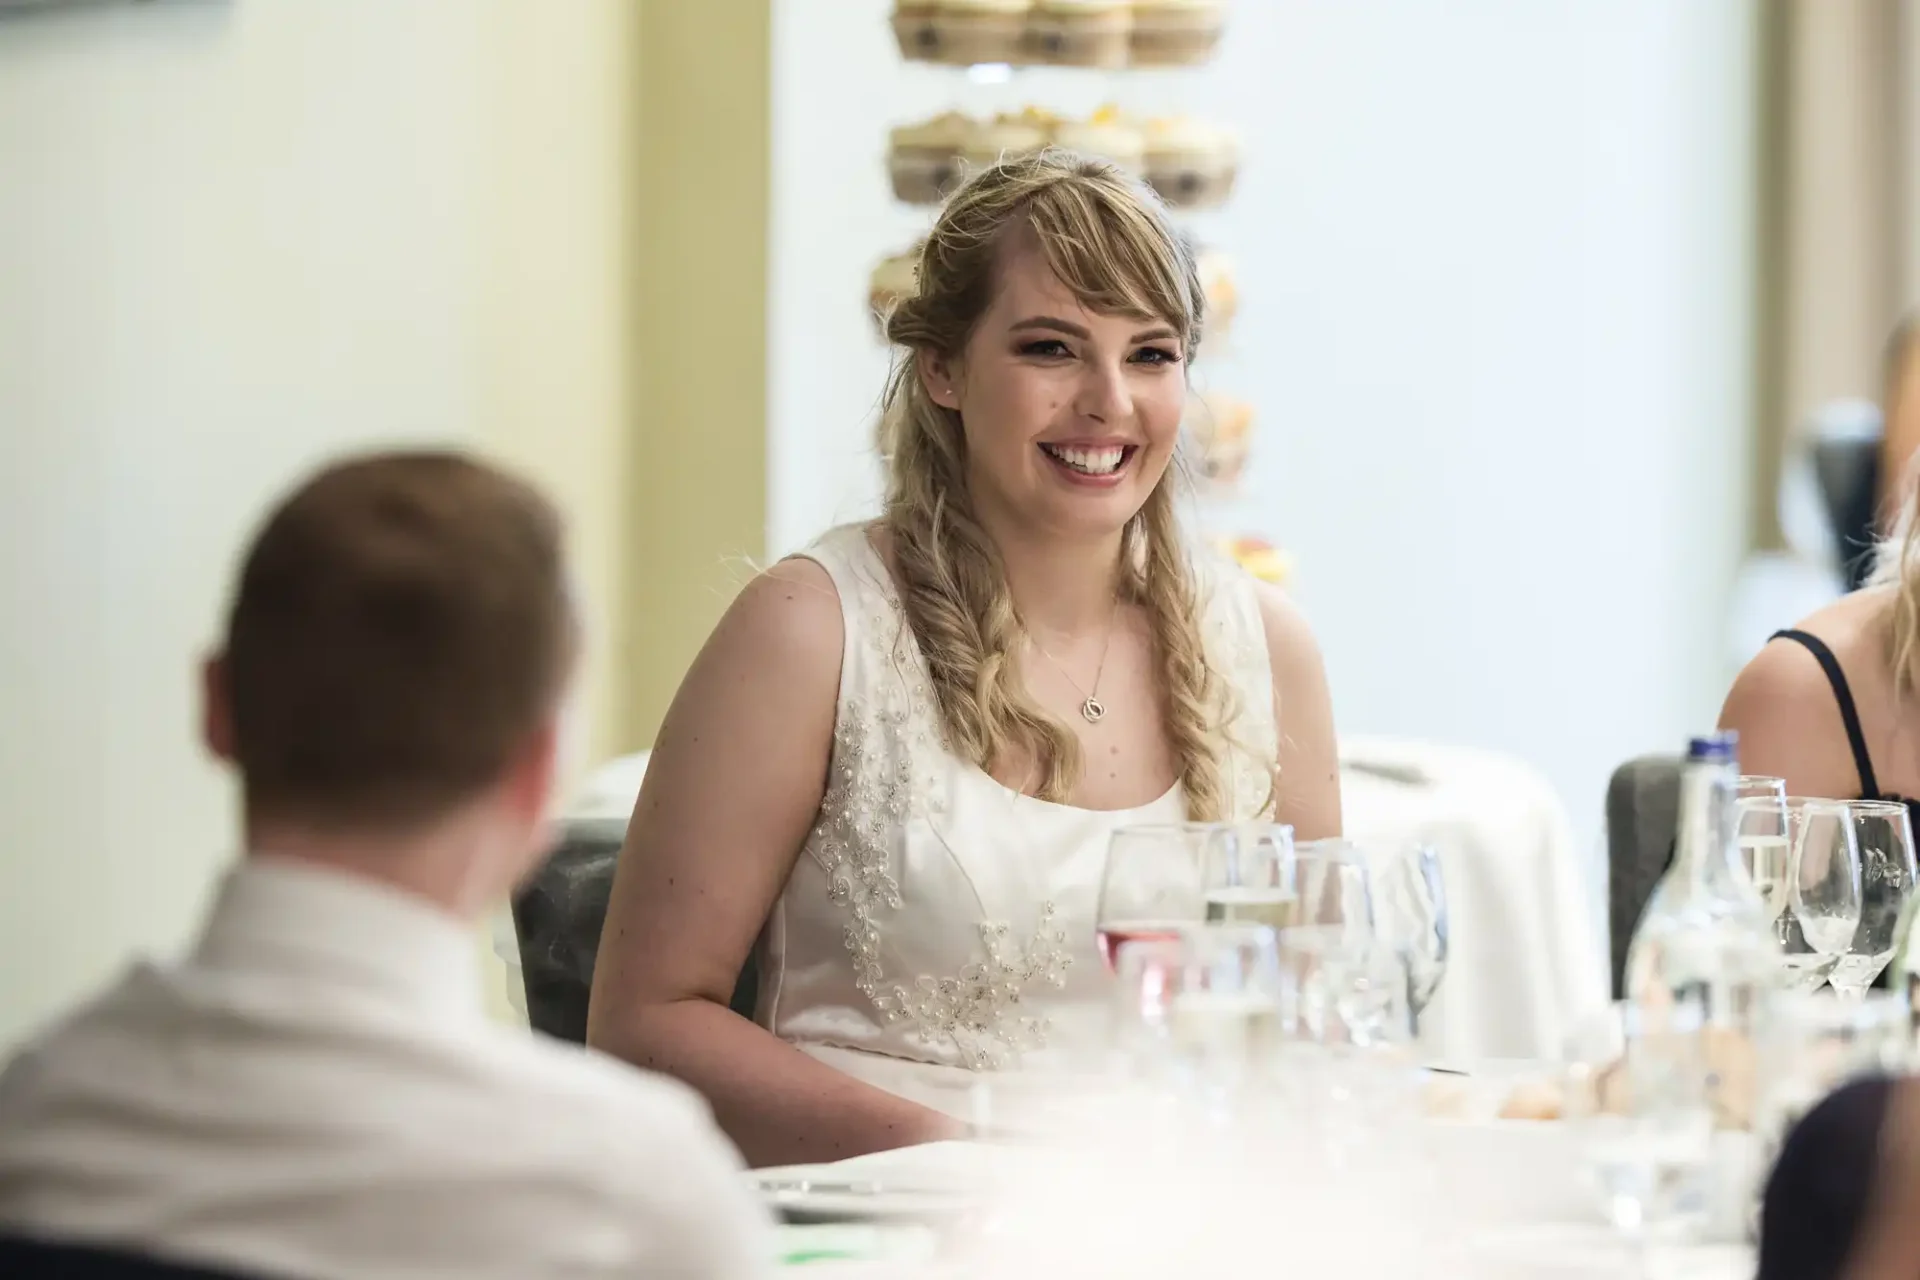 A bride smiling at a table during a wedding reception, surrounded by guests and table settings.